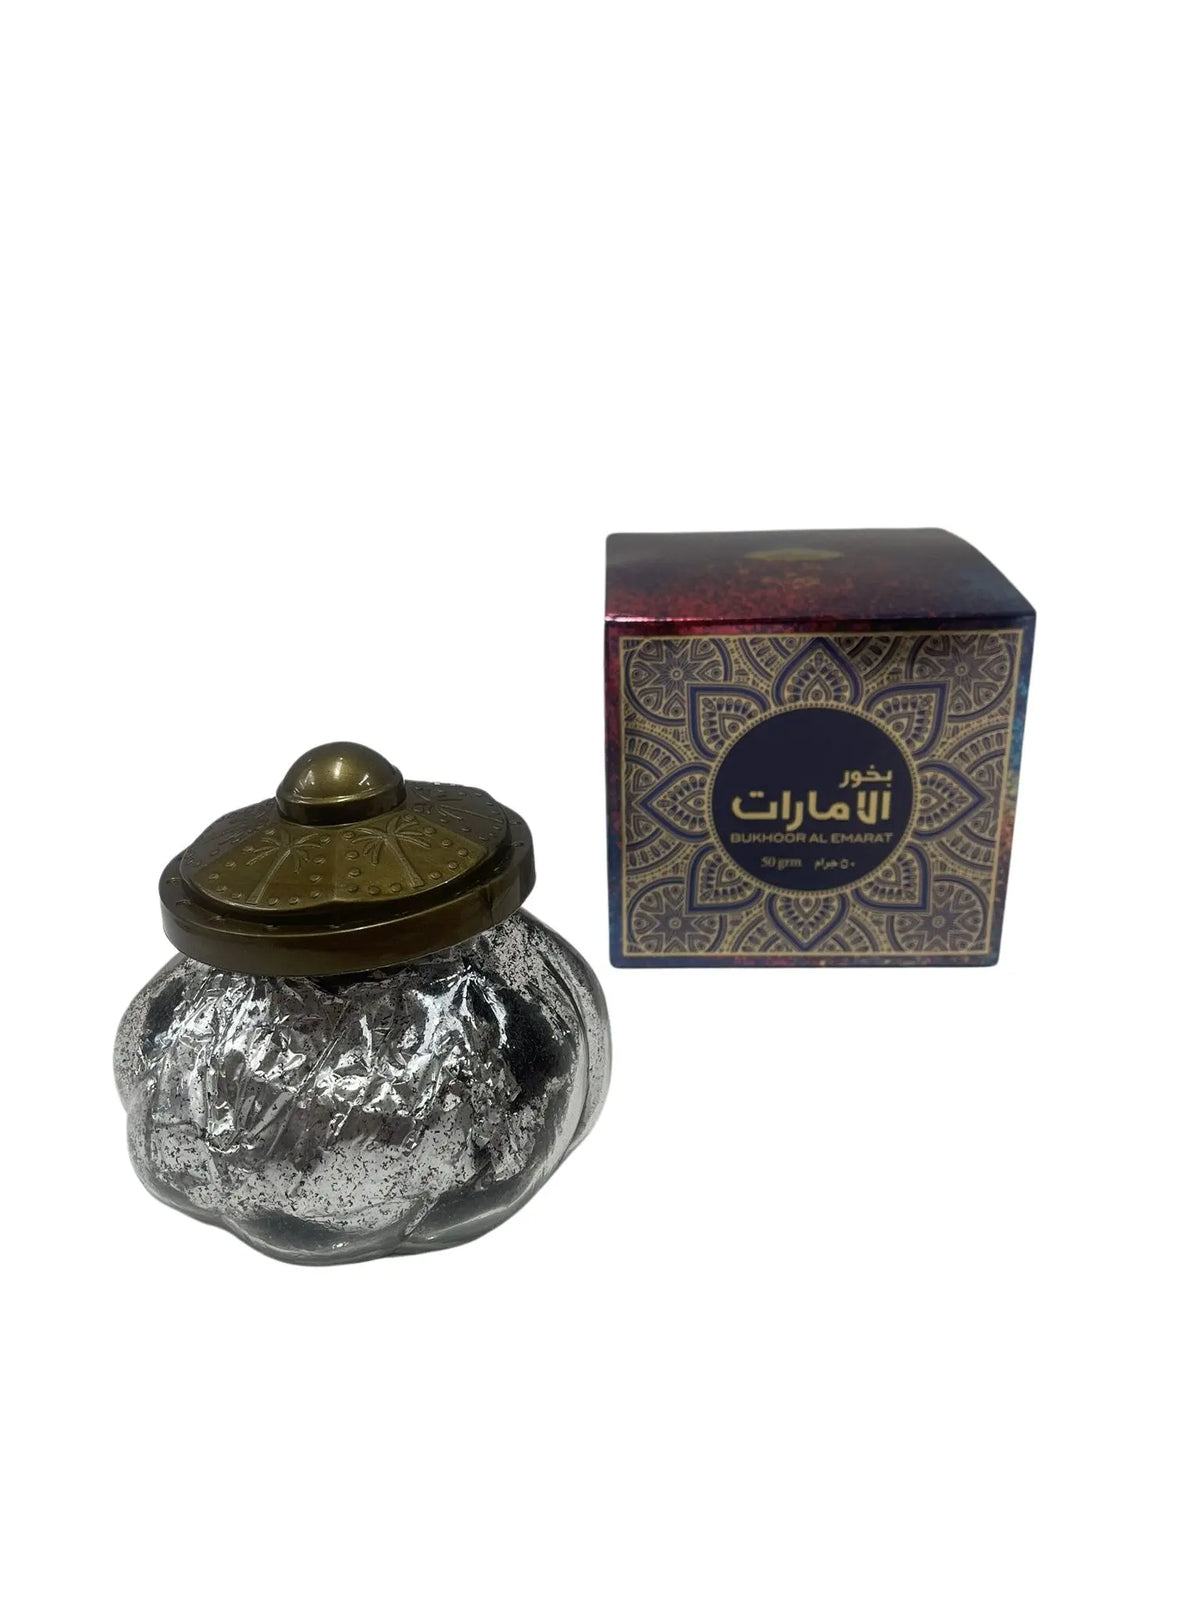 The image shows a product called "Bakhoor Al Emarat" by "Ard Al Zaafaran". It features an intricately patterned purple and gold box with Arabic script and English text. Next to the box is a decorative glass container with a silver foil texture and a brass-colored lid with embossed designs. The container seems to hold a traditional Middle Eastern scented product, typically used for burning and fragrance.